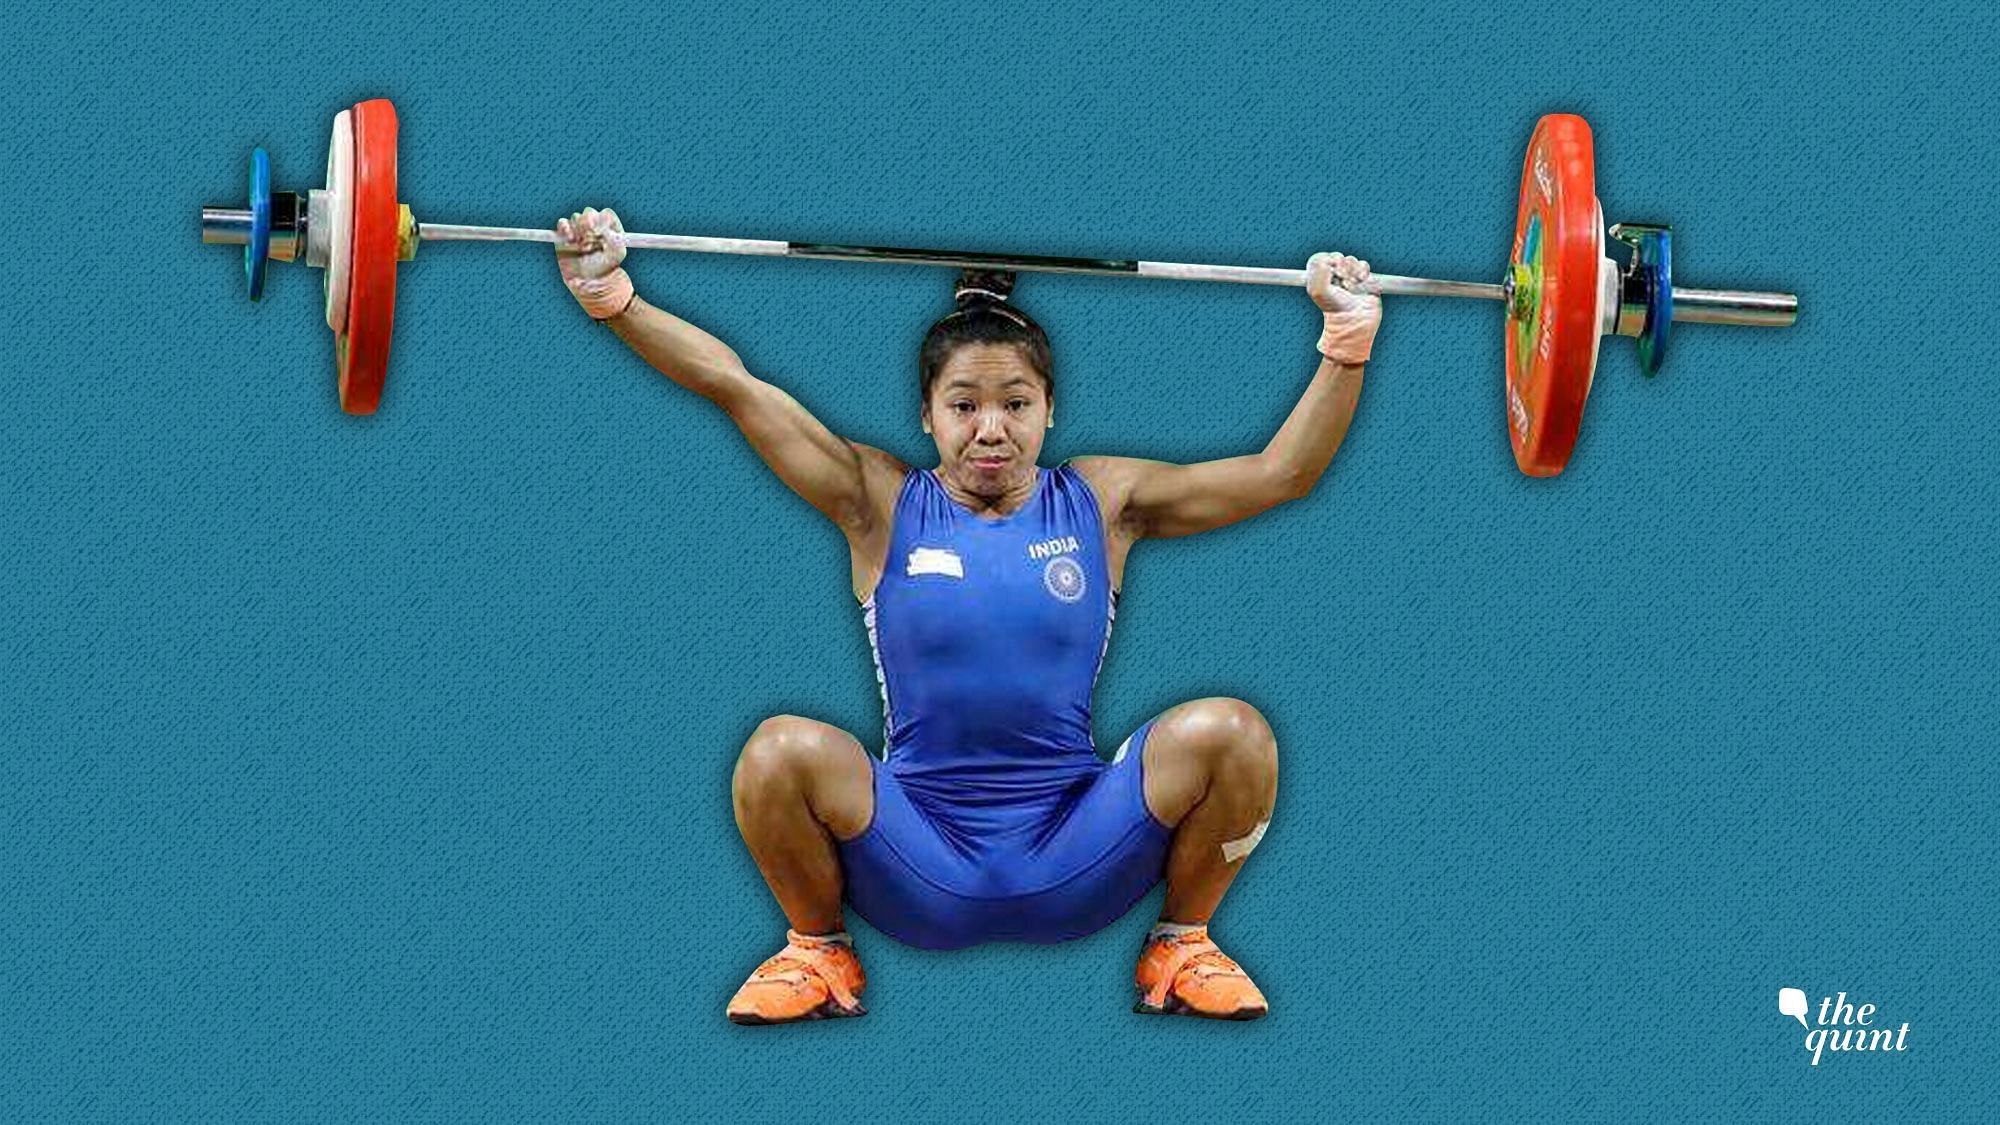 <div class="paragraphs"><p>Mirabai Chanu had won the gold medal in the 48kg category of the weightlifting event at the Gold Coast Commonwealth Games (CWG) in 2018.</p></div>